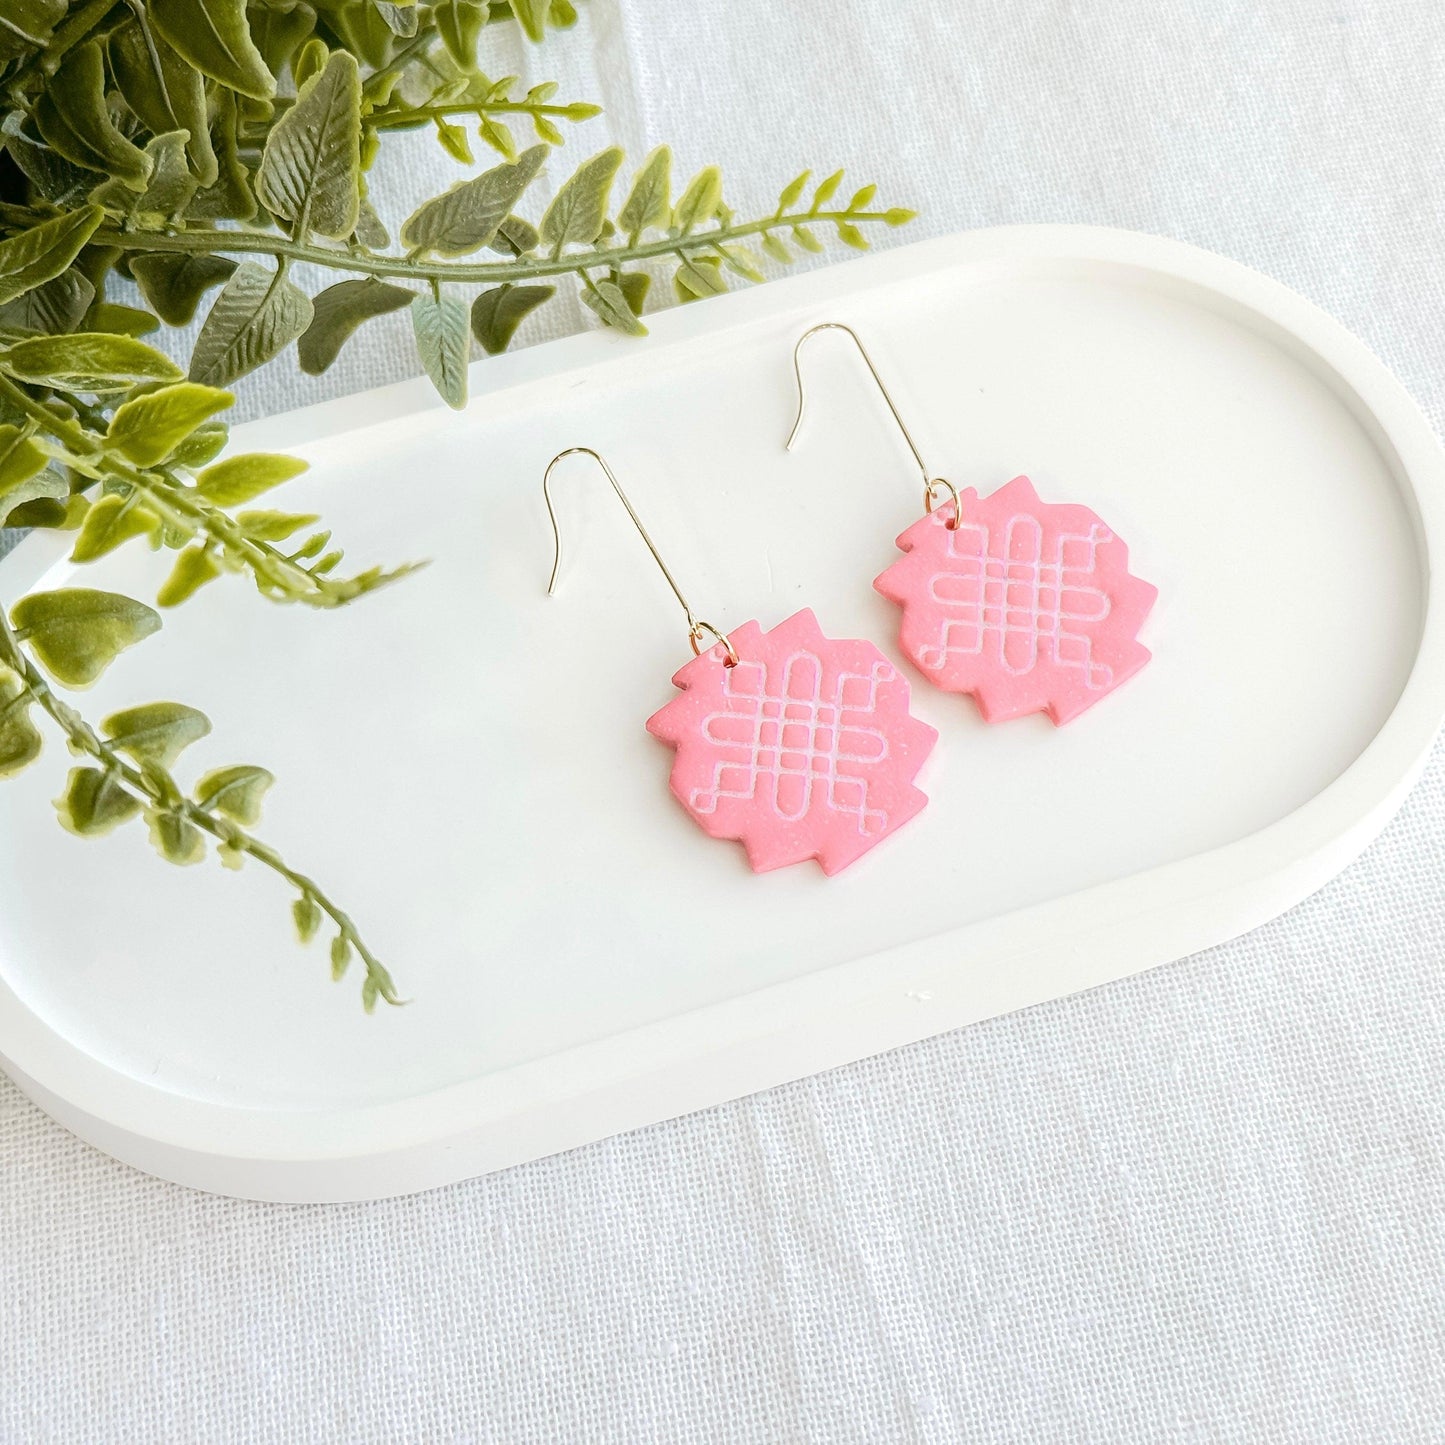 Pink Earrings, Polymer Clay Earrings, Birthday Gift for Friend, Handmade Earrings, Minimalist Drop Earrings, Gifts for Mom, Surgical Steel - Harbor to Gulf Co.